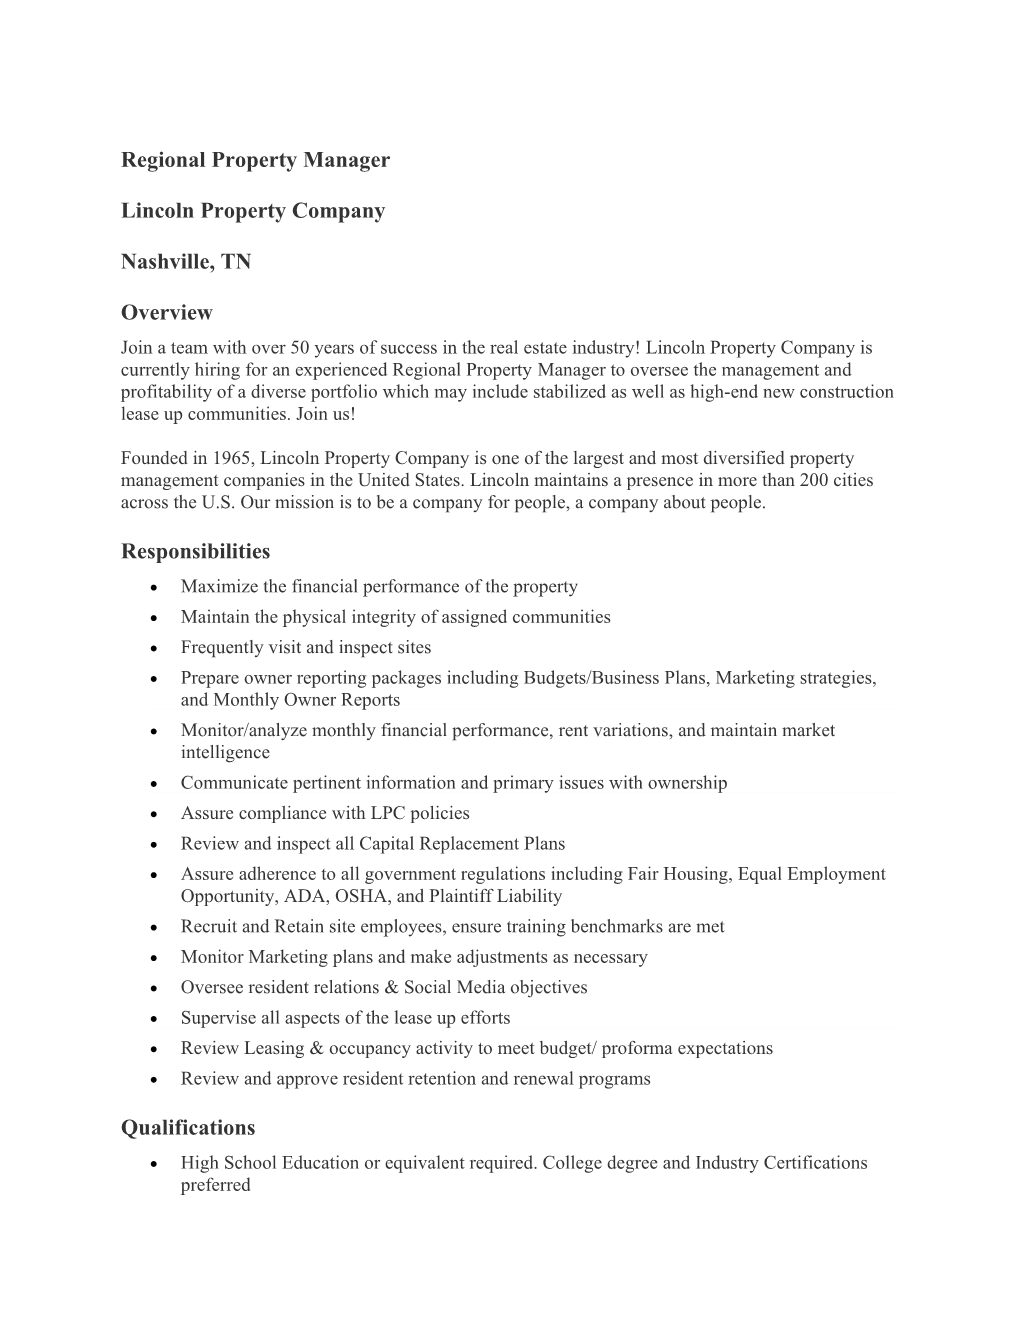 Regional Property Manager